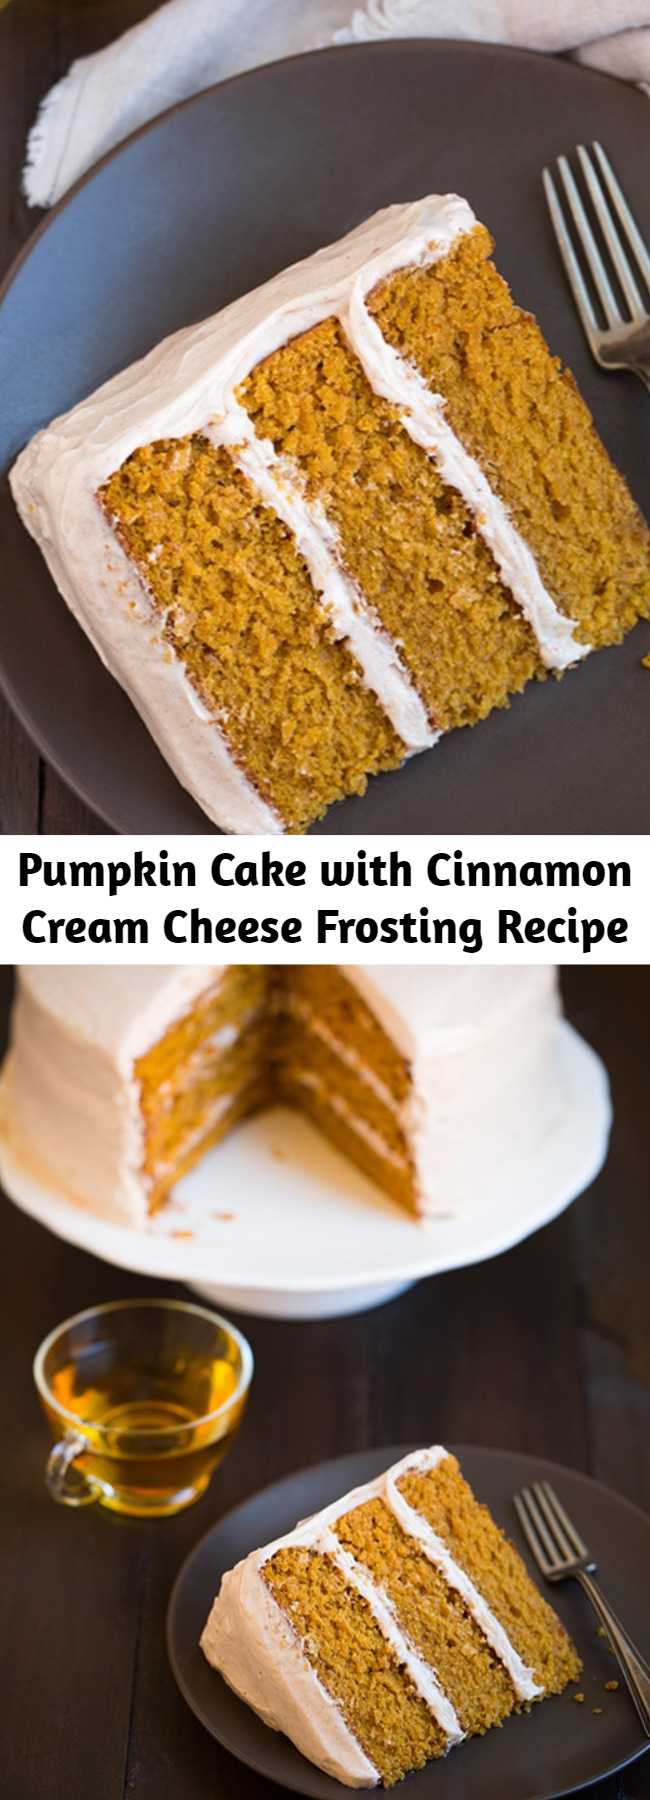 Pumpkin Cake with Cinnamon Cream Cheese Frosting Recipe - The tastiest pumpkin cake! It’s soft and moist with just the right amount of pumpkin and spice, and it's finished with the best frosting! This is one of my favorites! Melt-in-your-mouth delicious!!